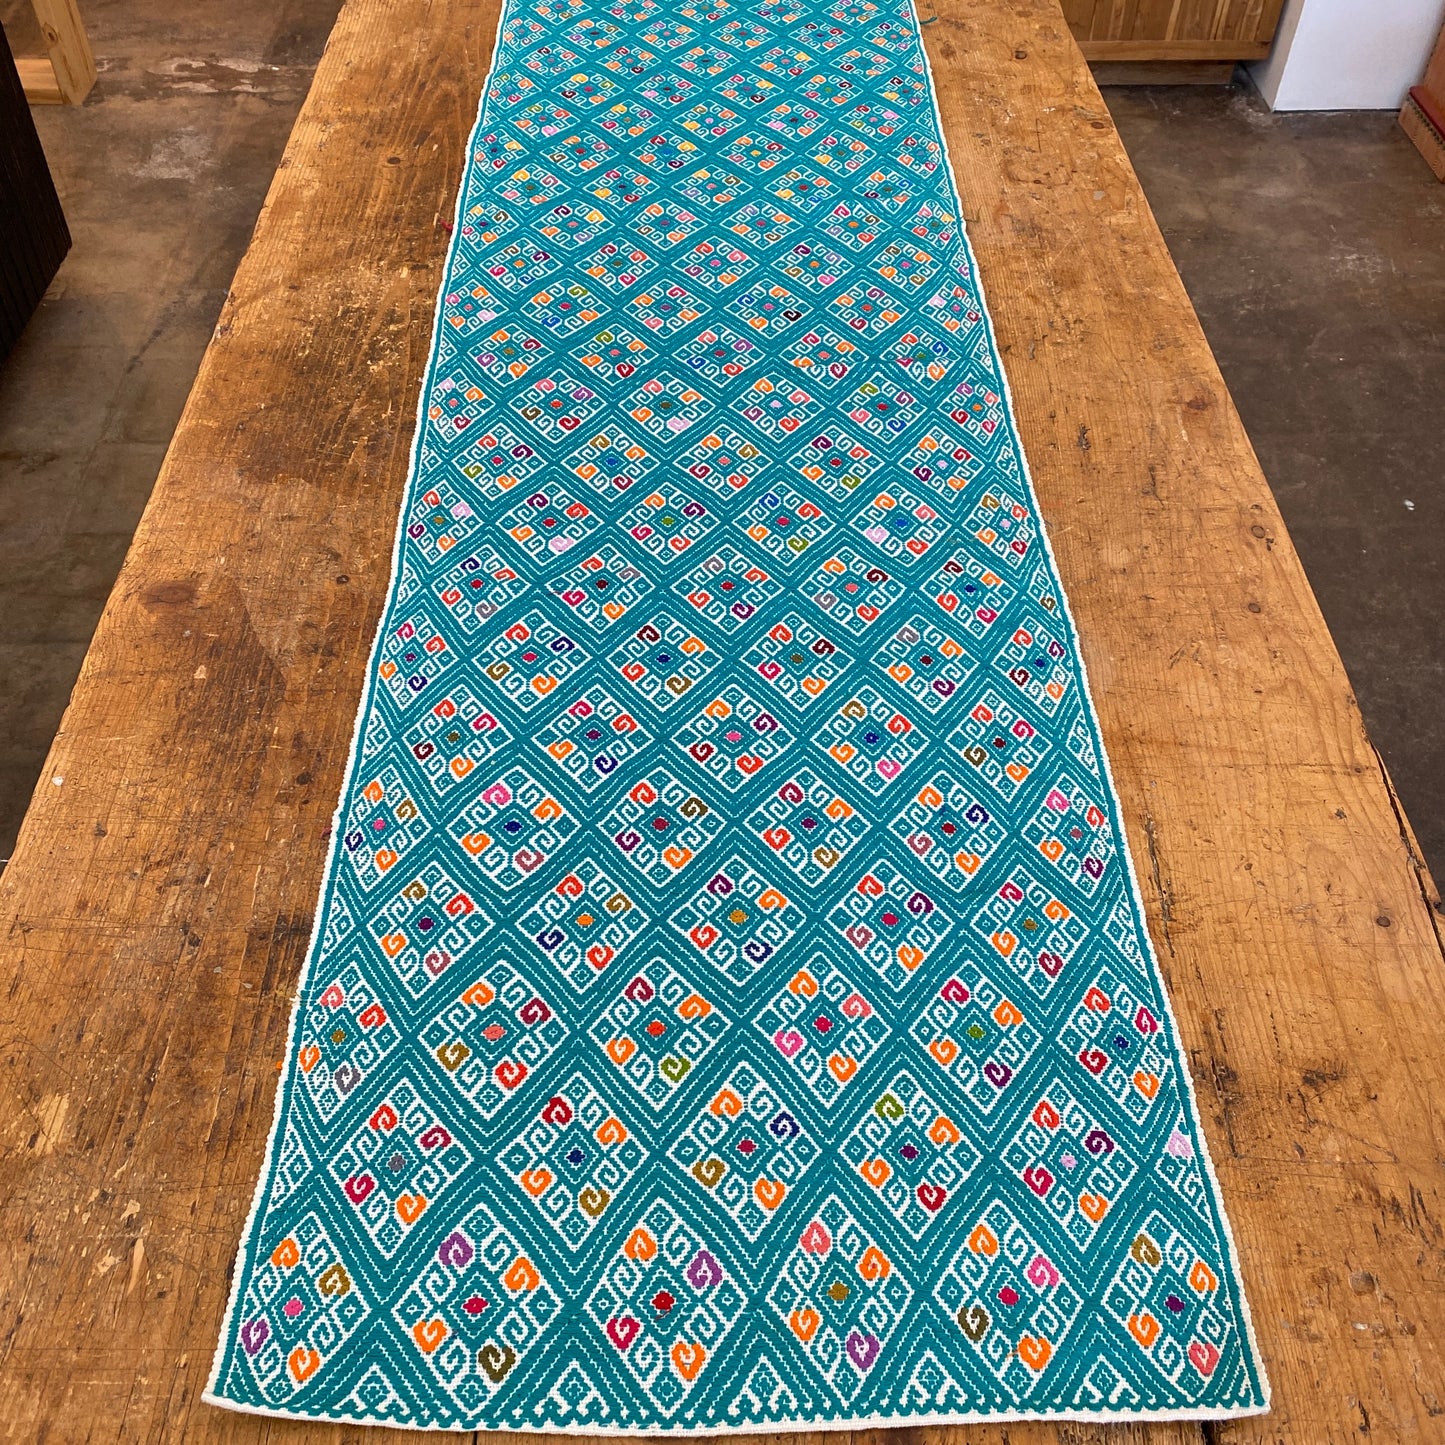 Woven Diamond Table Runners from Mexico - Teal and White